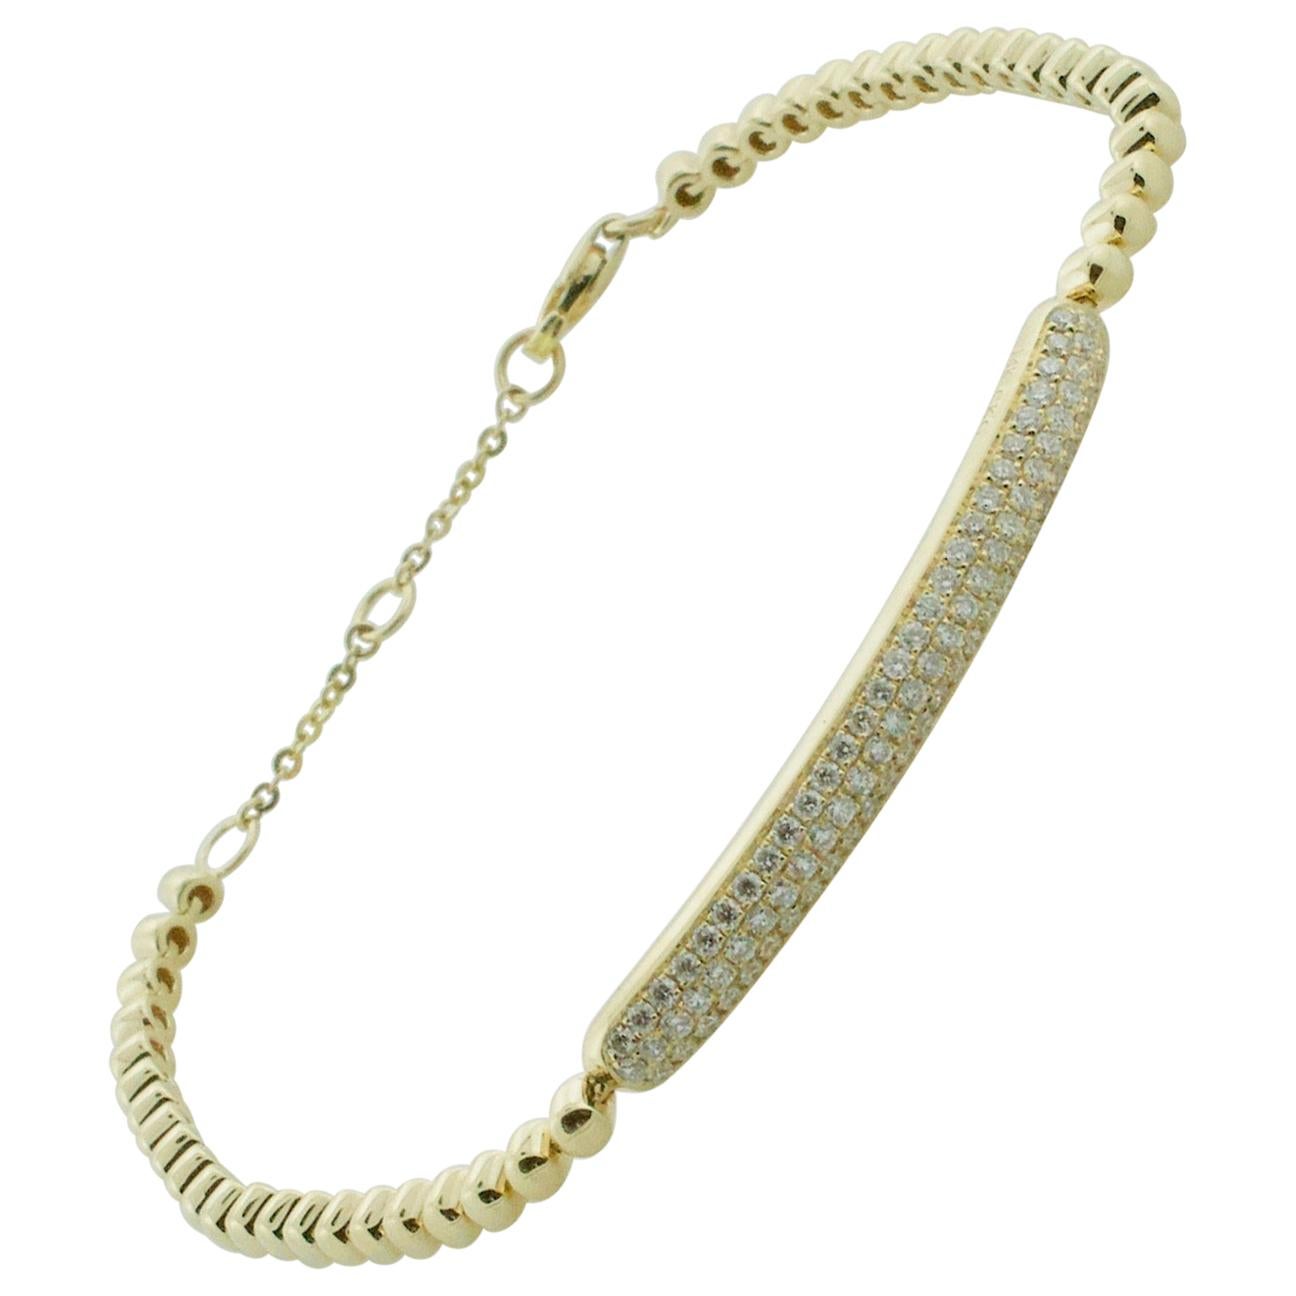 Pave Diamond Yellow Gold Bracelet .60 carats
85 Round Brilliant Cut Diamonds Weighing .60 Carats Approximately [GH VVS]
7 1/2 inches and Adjustable  